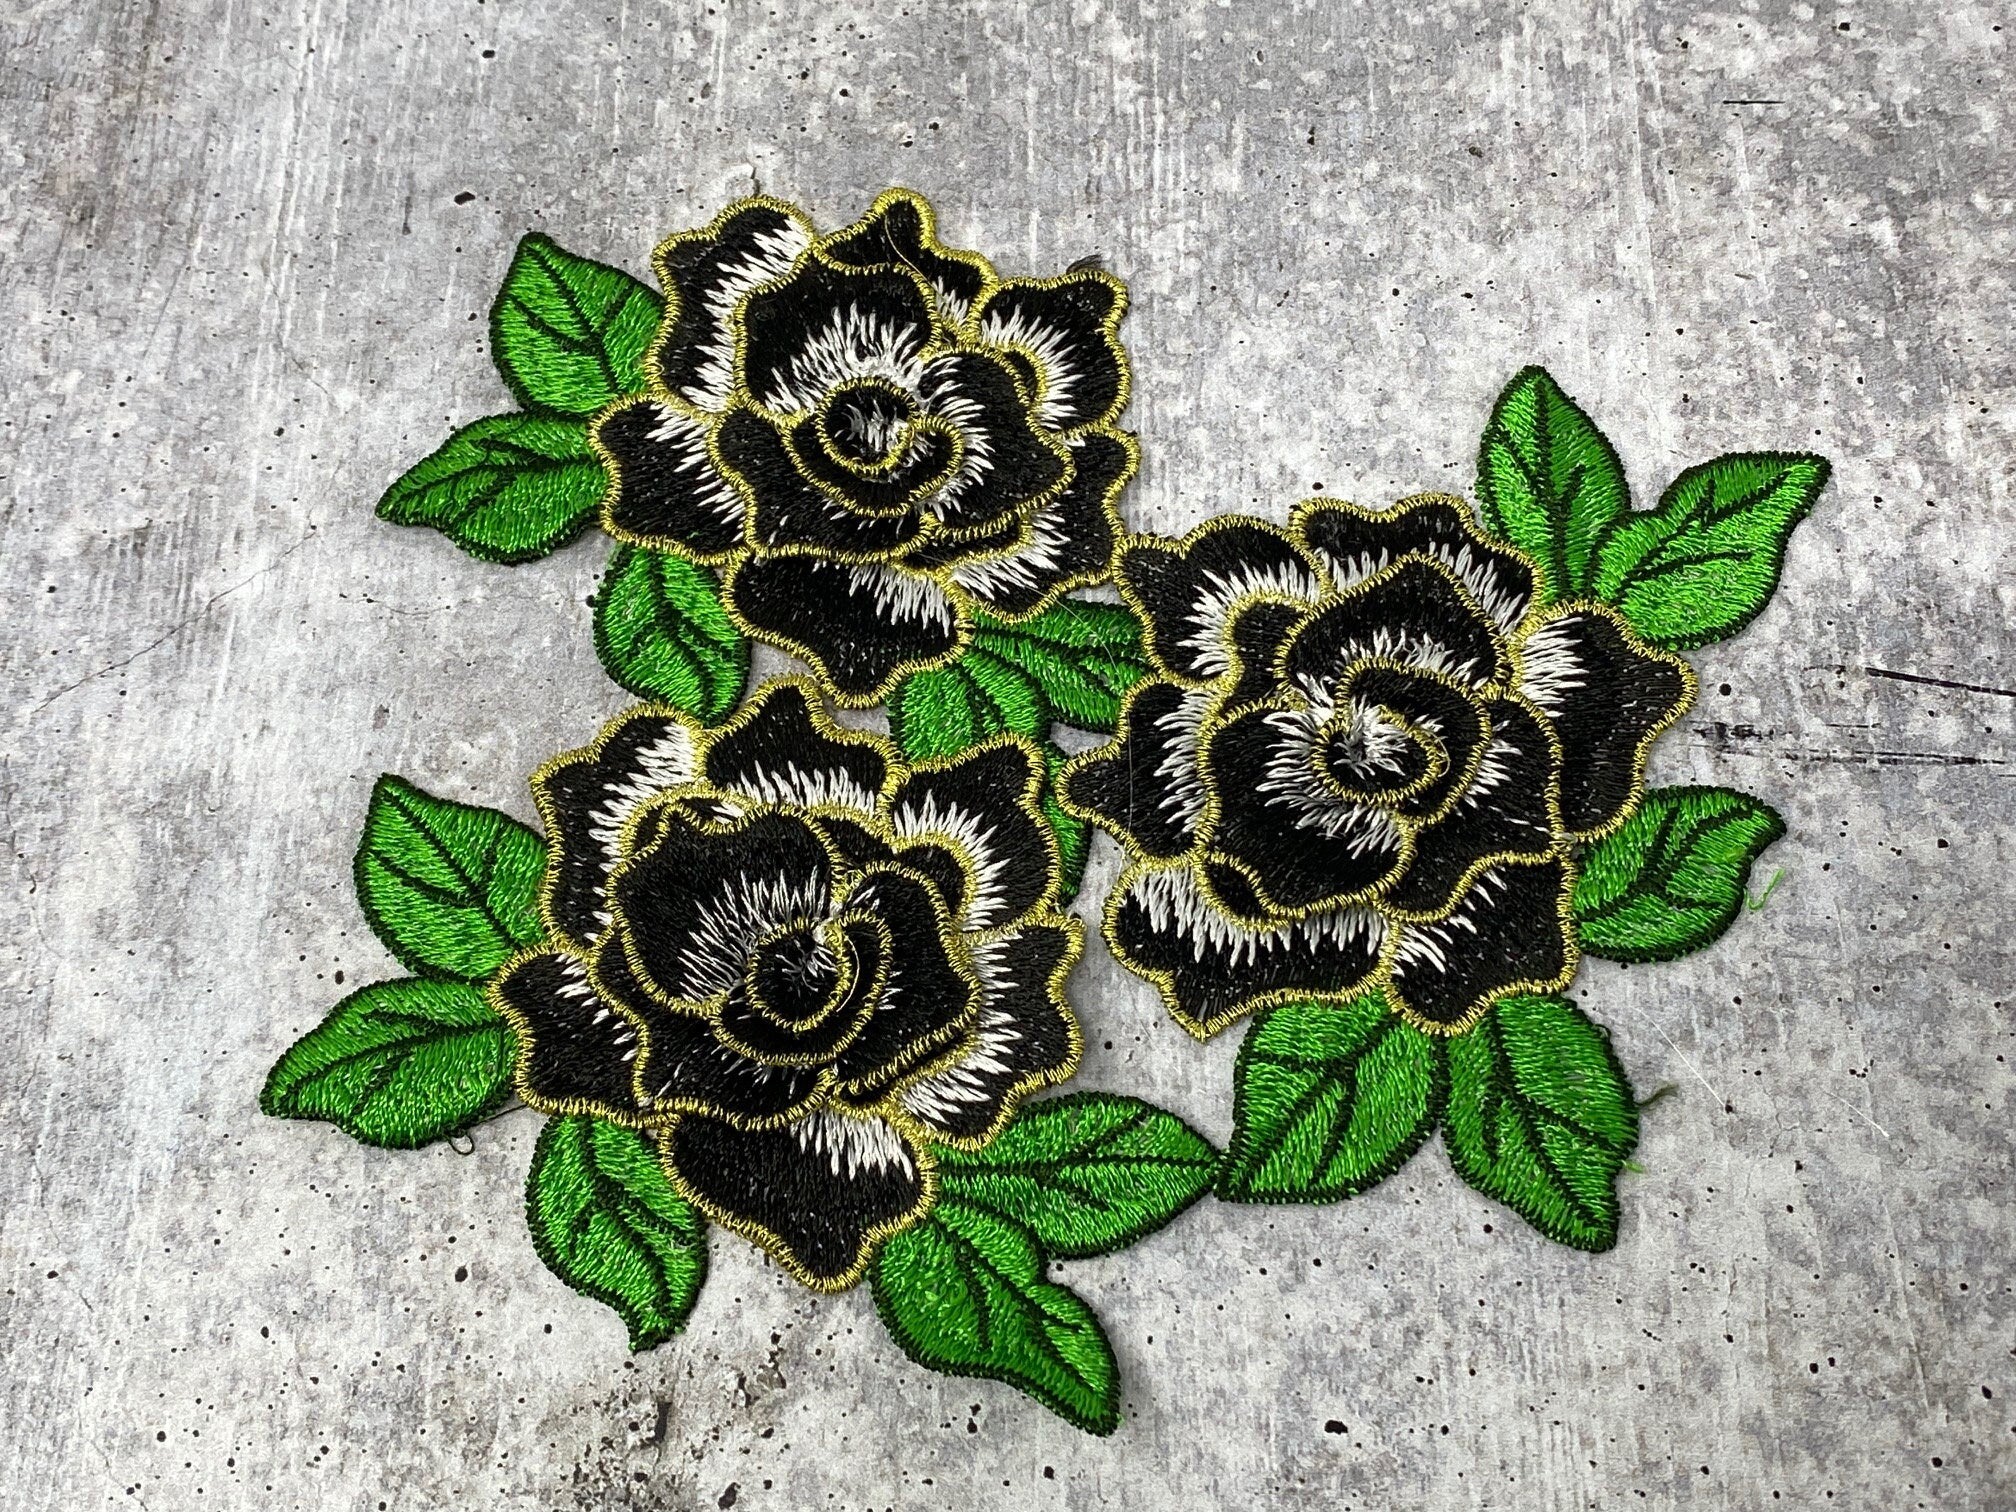 NEW,  2 pc set, Black & Gold Roses (size 4-inches), matching lace sew-on floral patches (2 pcs), Flower Patches, Rose Lace Patches